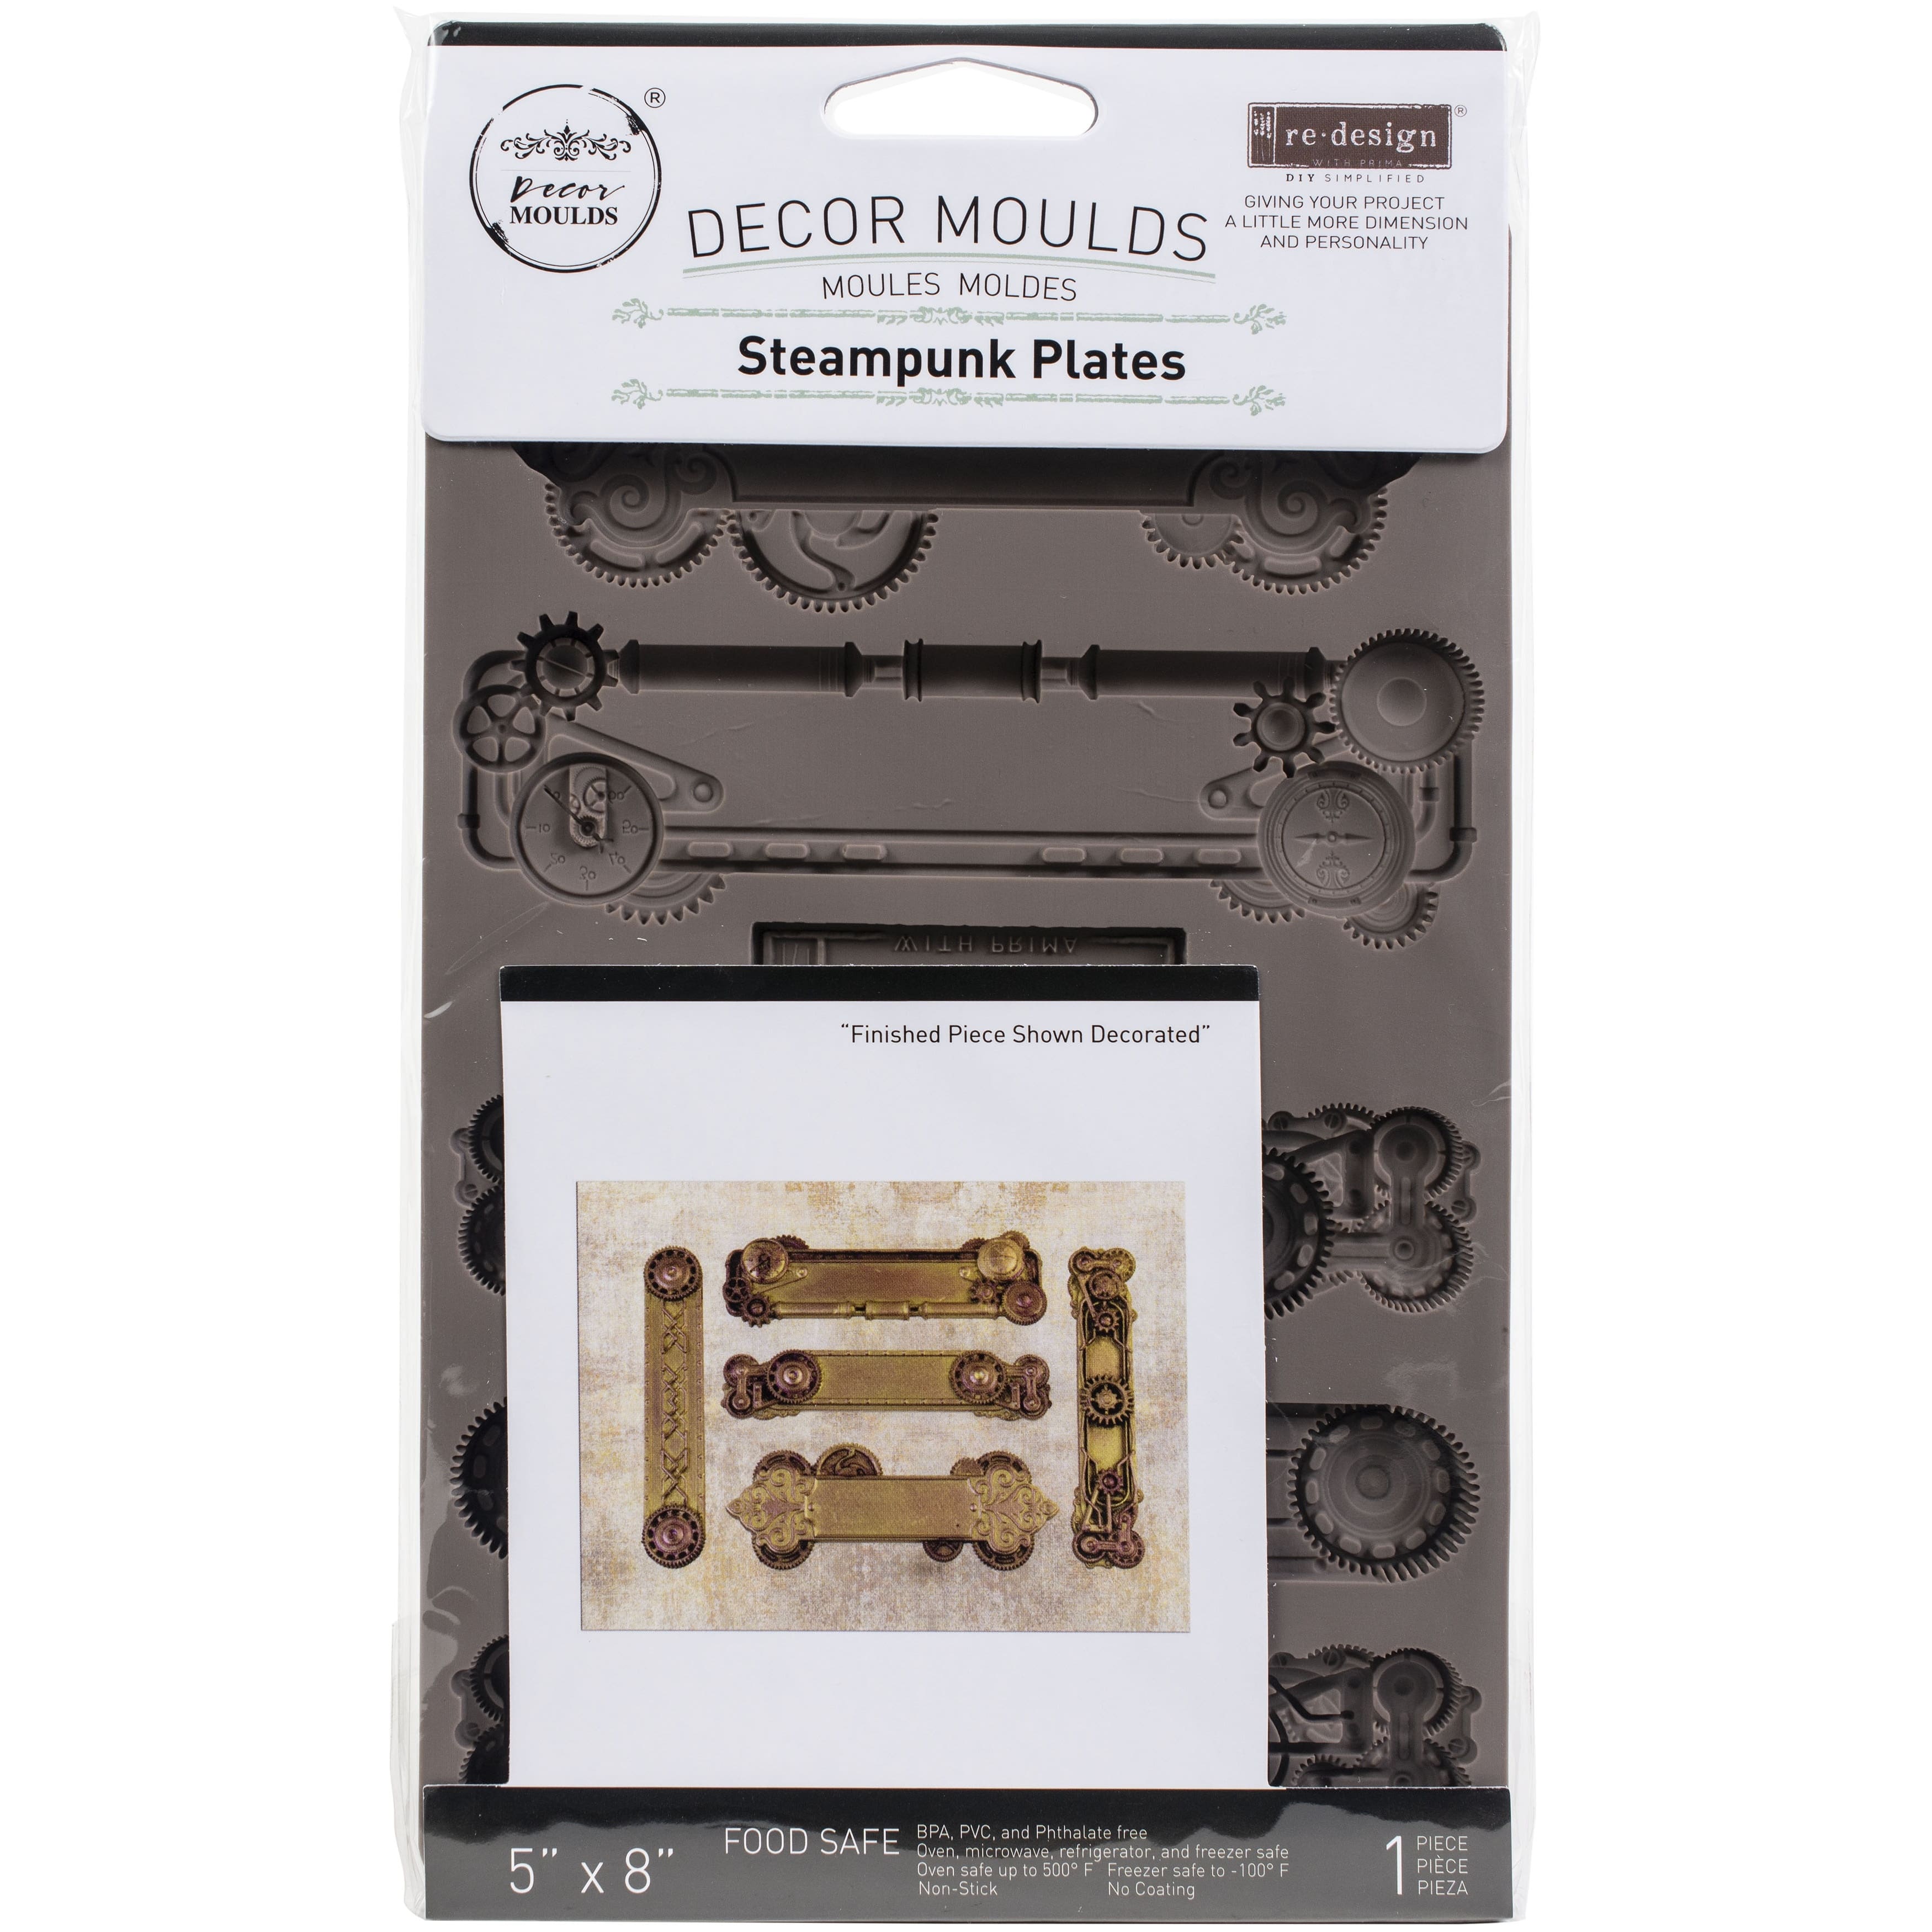 Redesign with Prima&#xAE; Decor Mould&#xAE; Steampunk Plates Silicone Mold